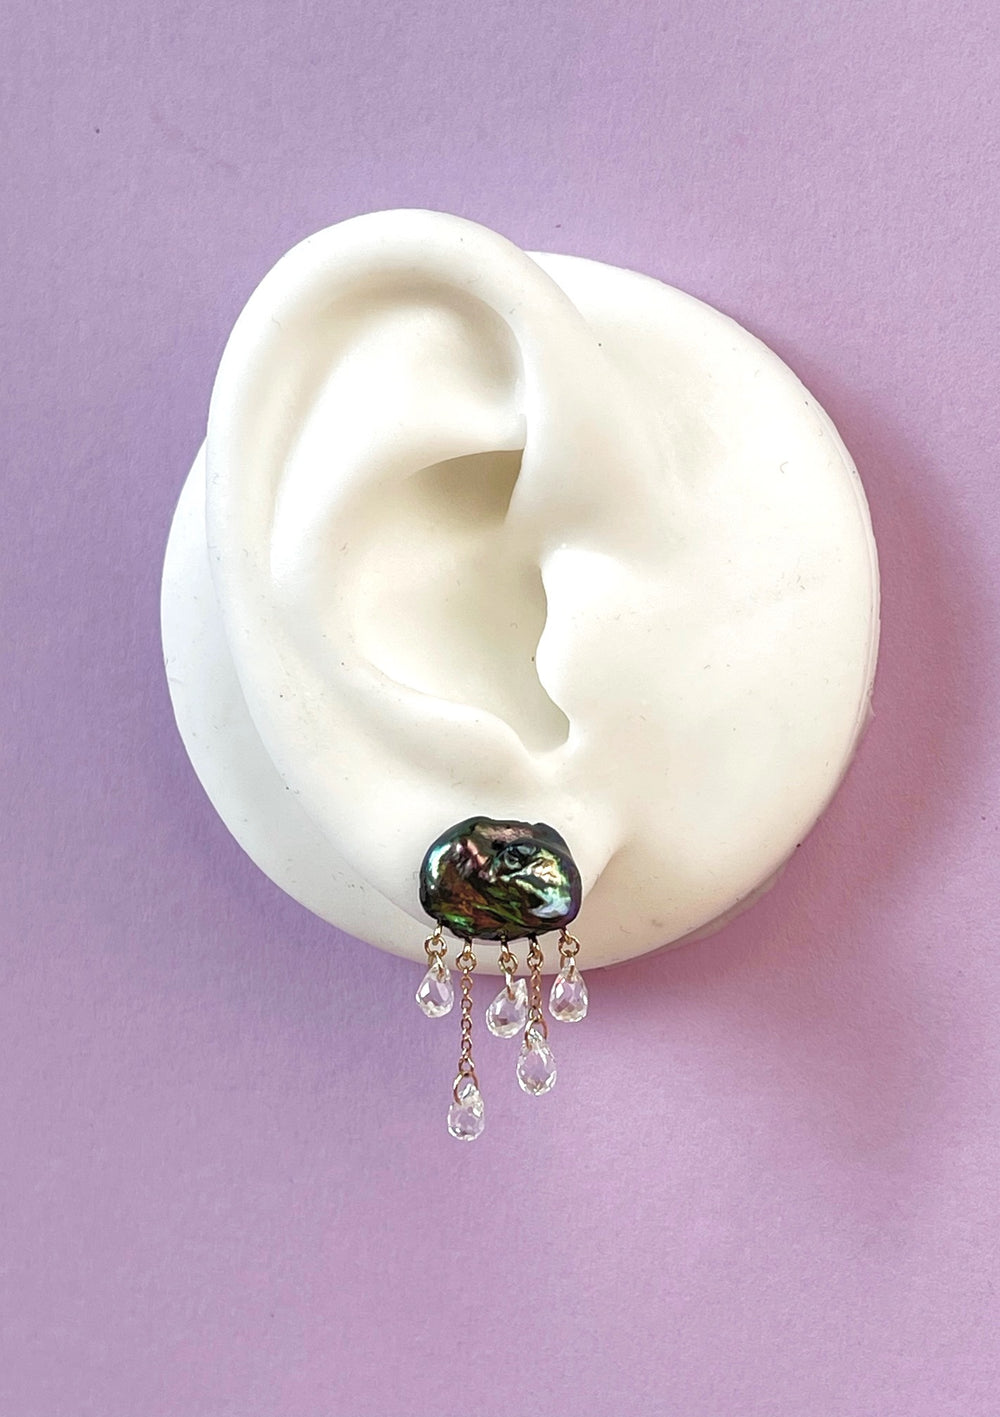 white ear shape one purple background with dark cloud-shaped pearl earring with 5 raindrops dangling below